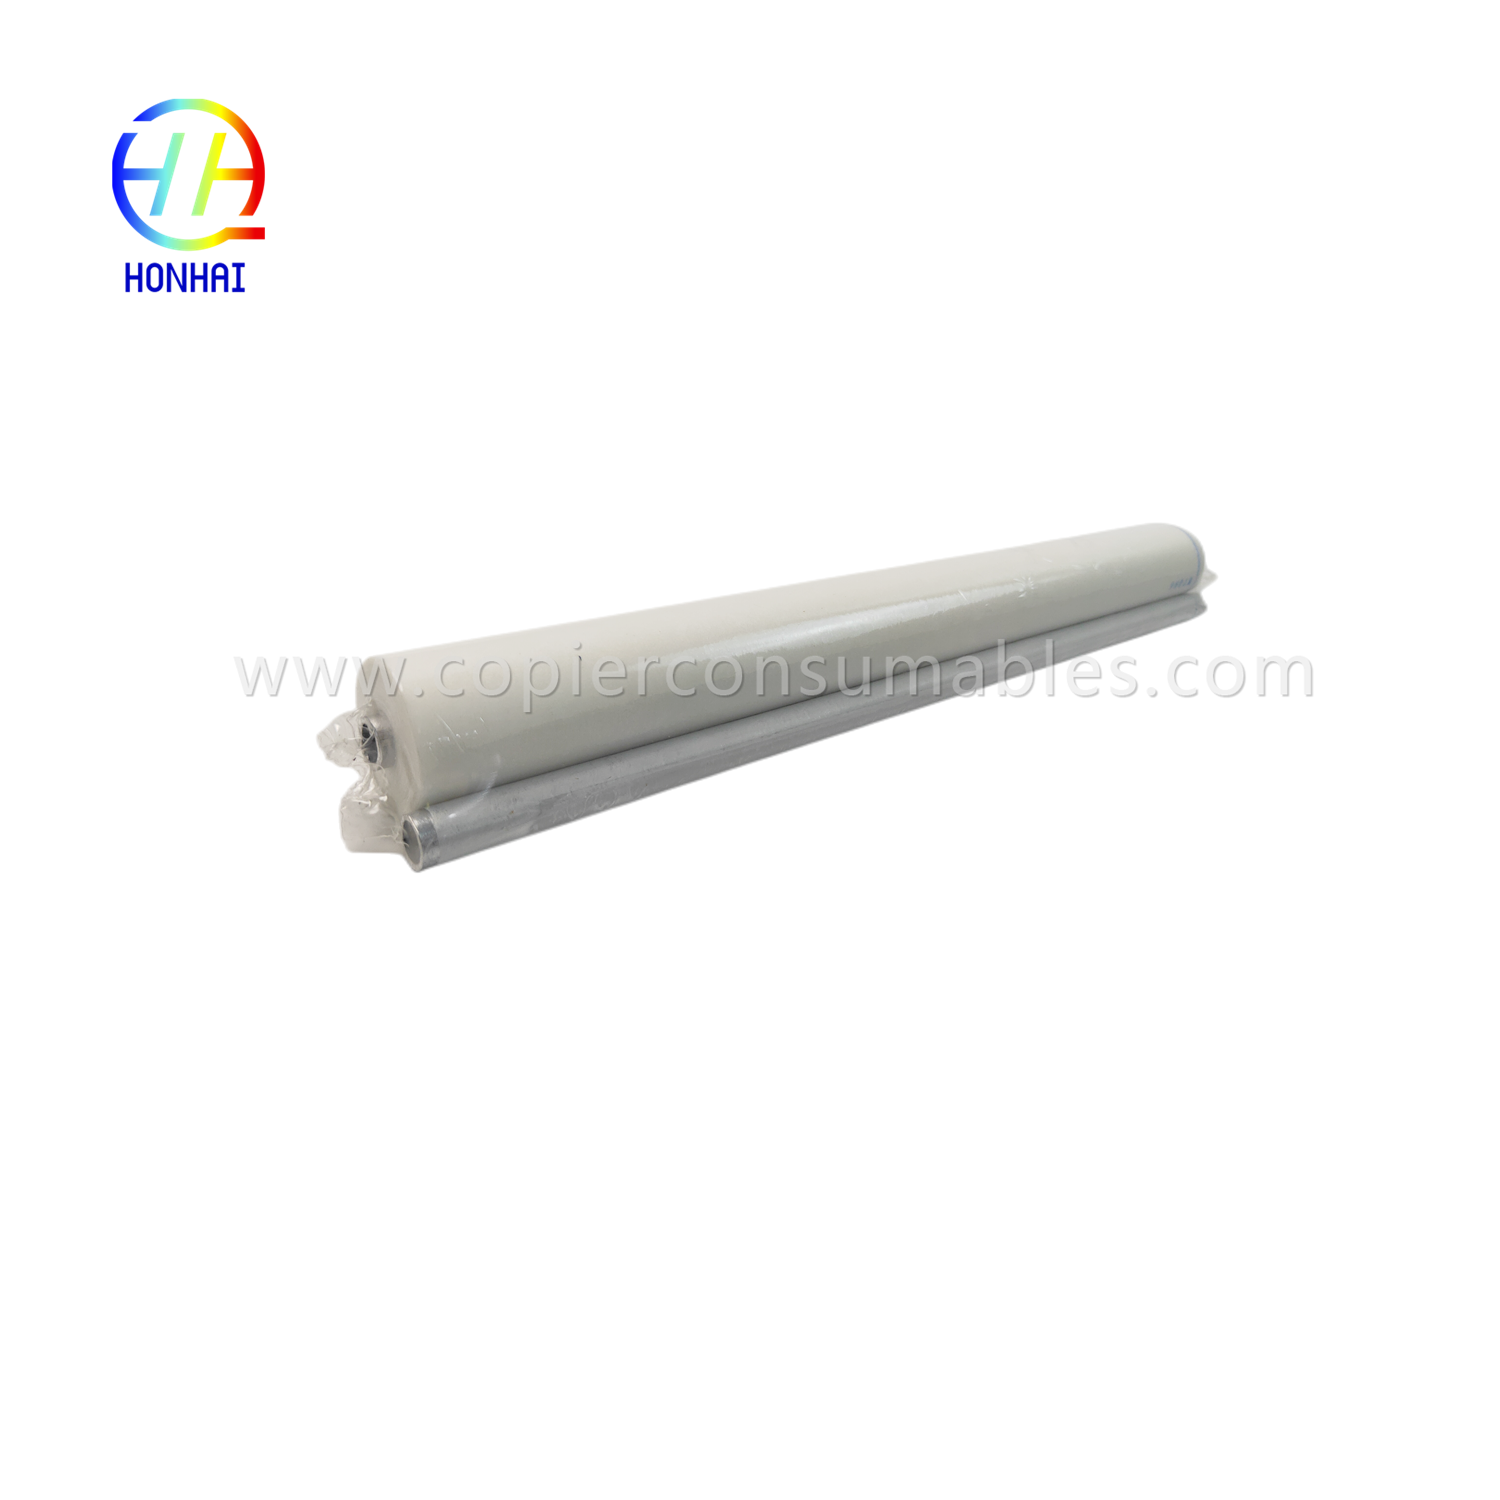 https://www.copierconsumables.com/fuser-cleaning-web-for-canon-ir6800-ir-8085-8095-8105-8205-8285-8295-fq-009-fc5-2286-000-oem-fuser- glanadh-fuser-roller-toradh/